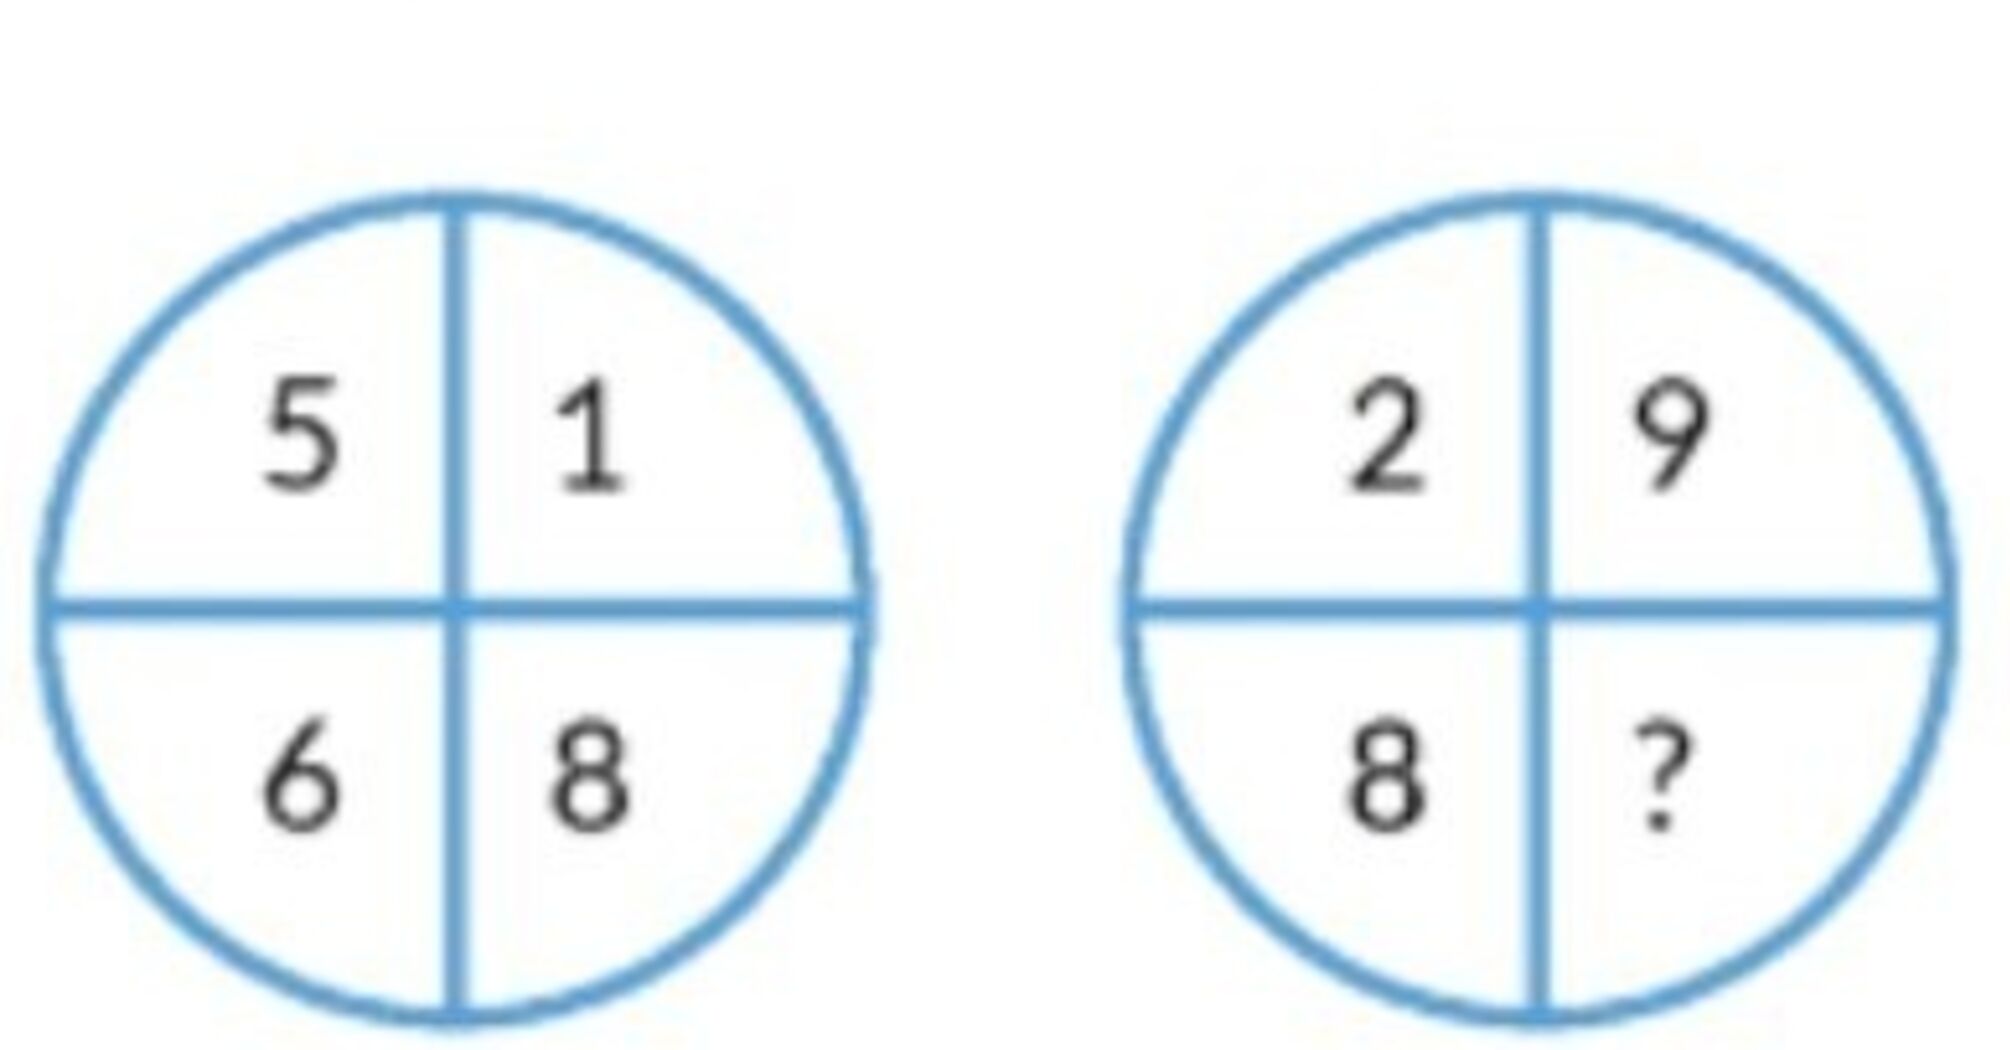 Do you consider yourself smart? This clever math puzzle will show if it is really so